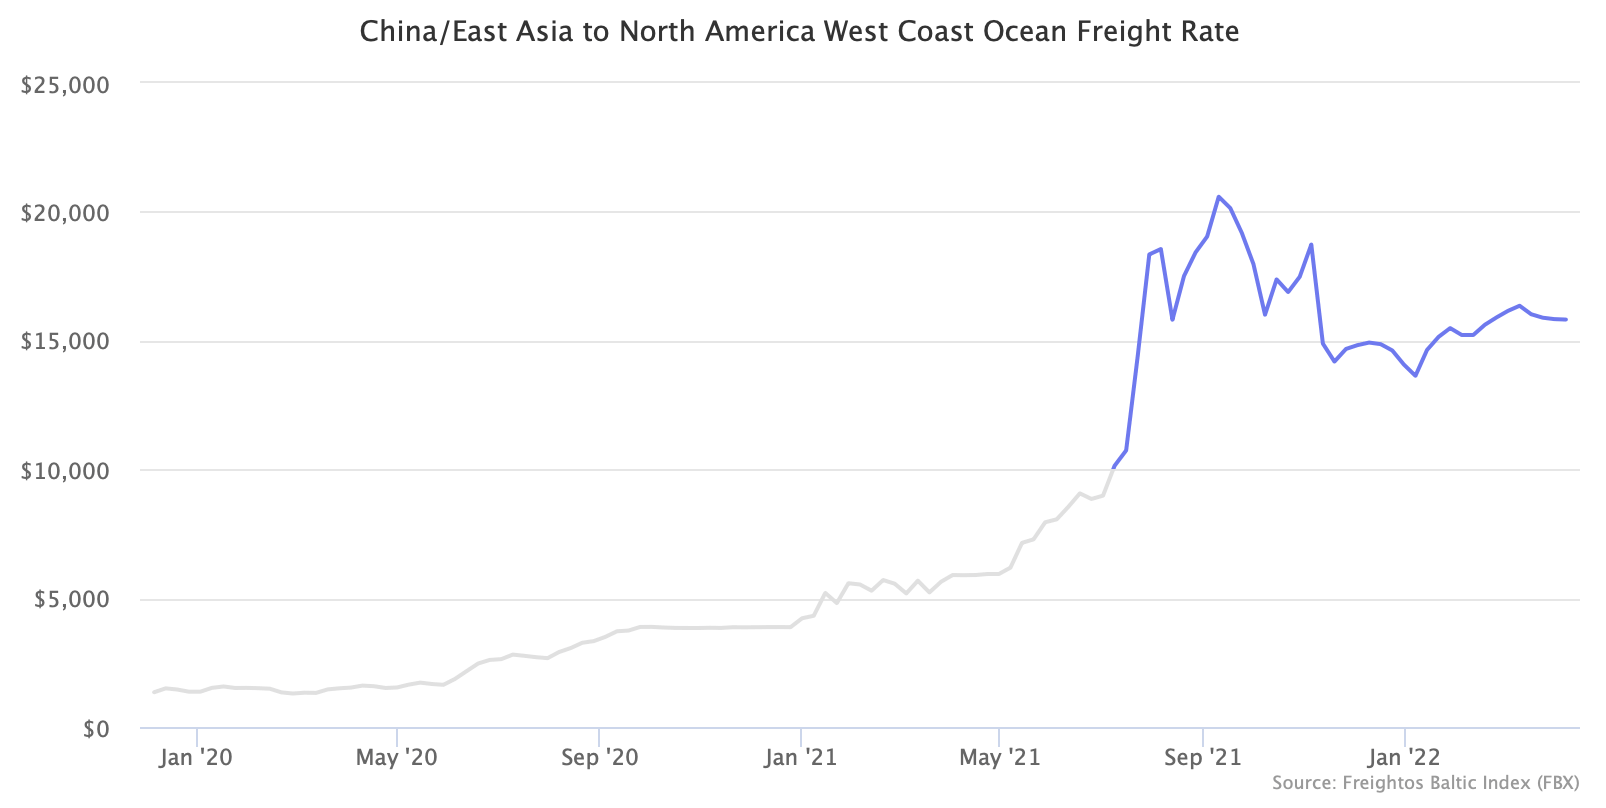 China/East Asia to North America West Coast Ocean Freight Rate